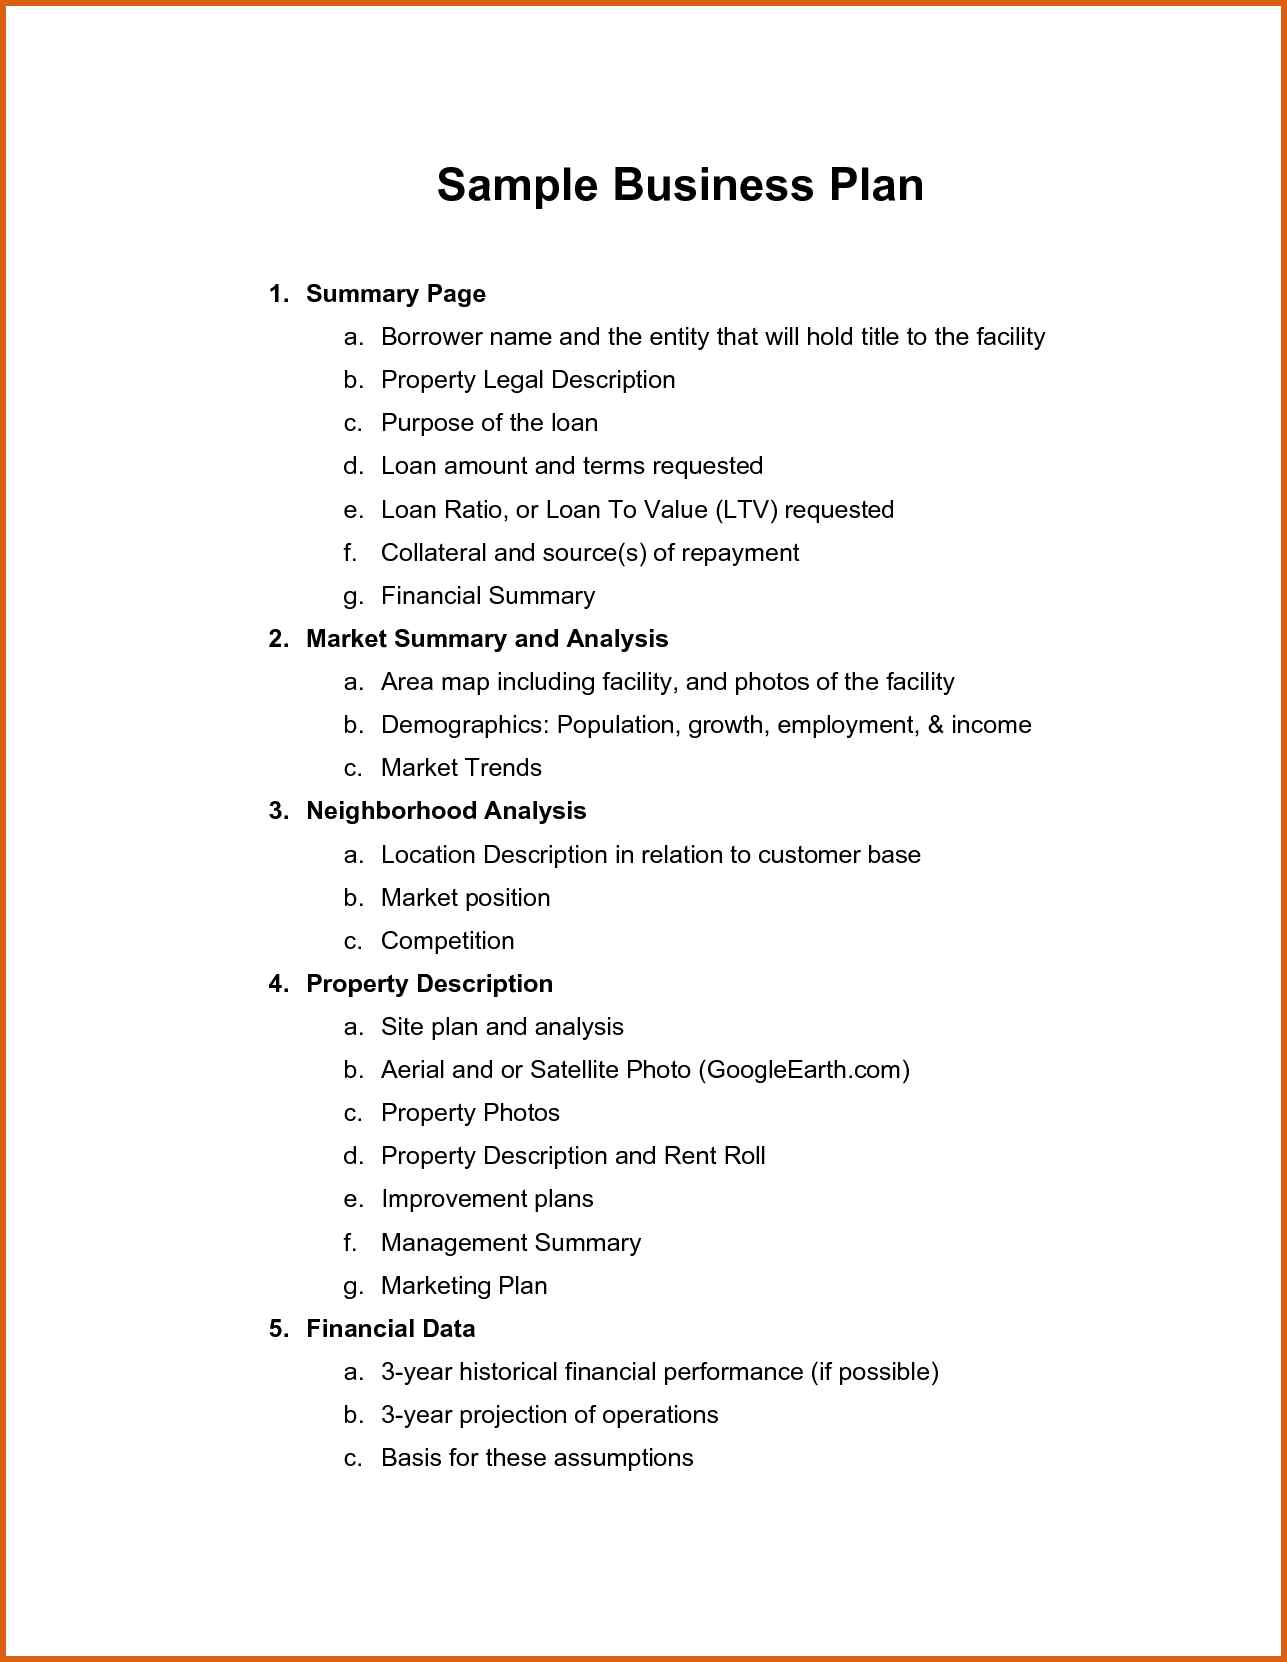 Strategic Business Plan Template | blank forms